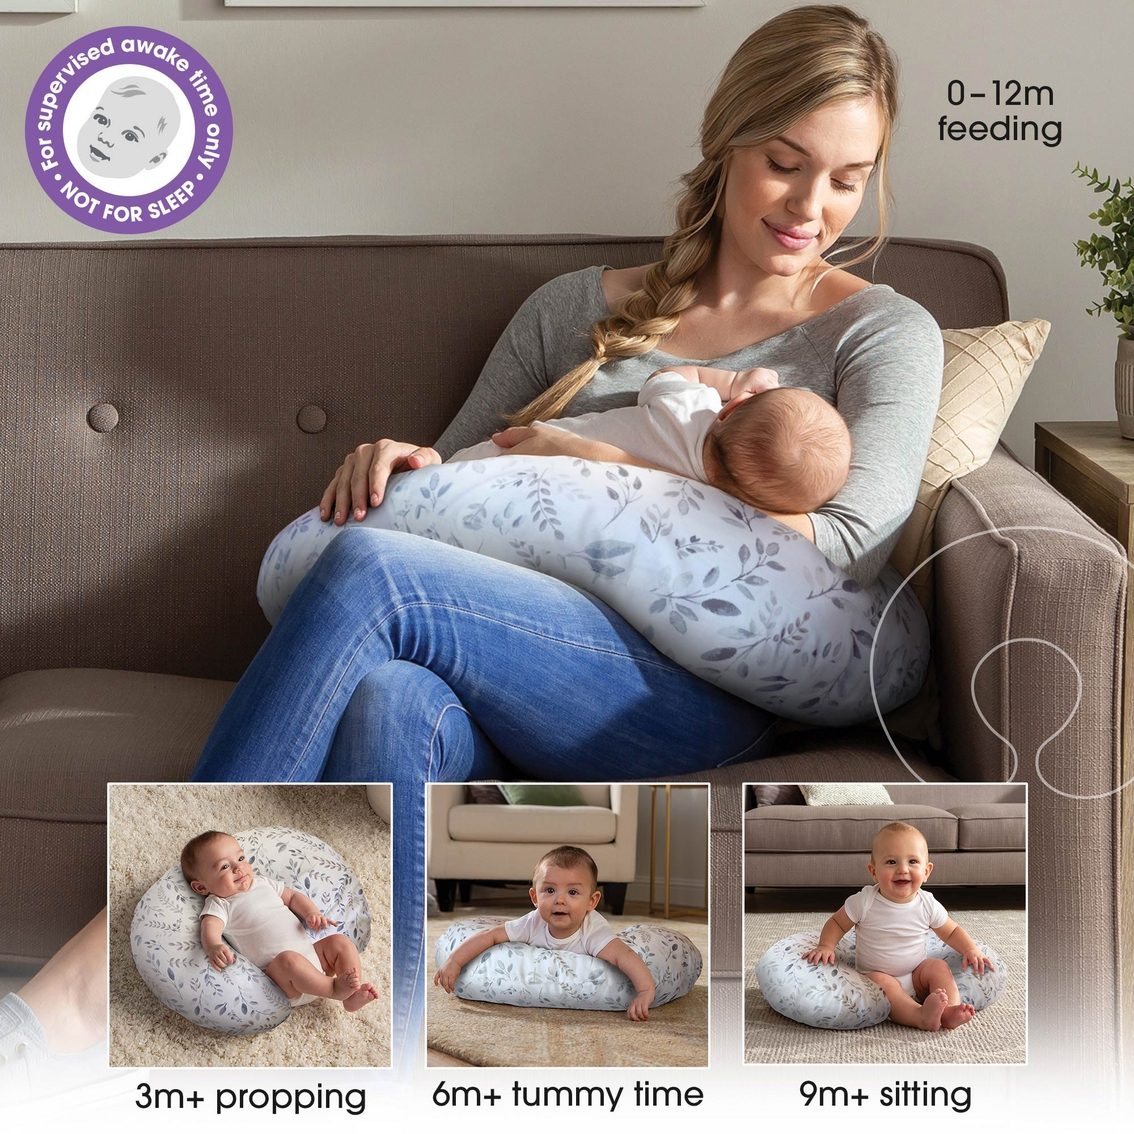 Boppy Original Support Nursing Pillow in Gray Forest Animals | Polyester